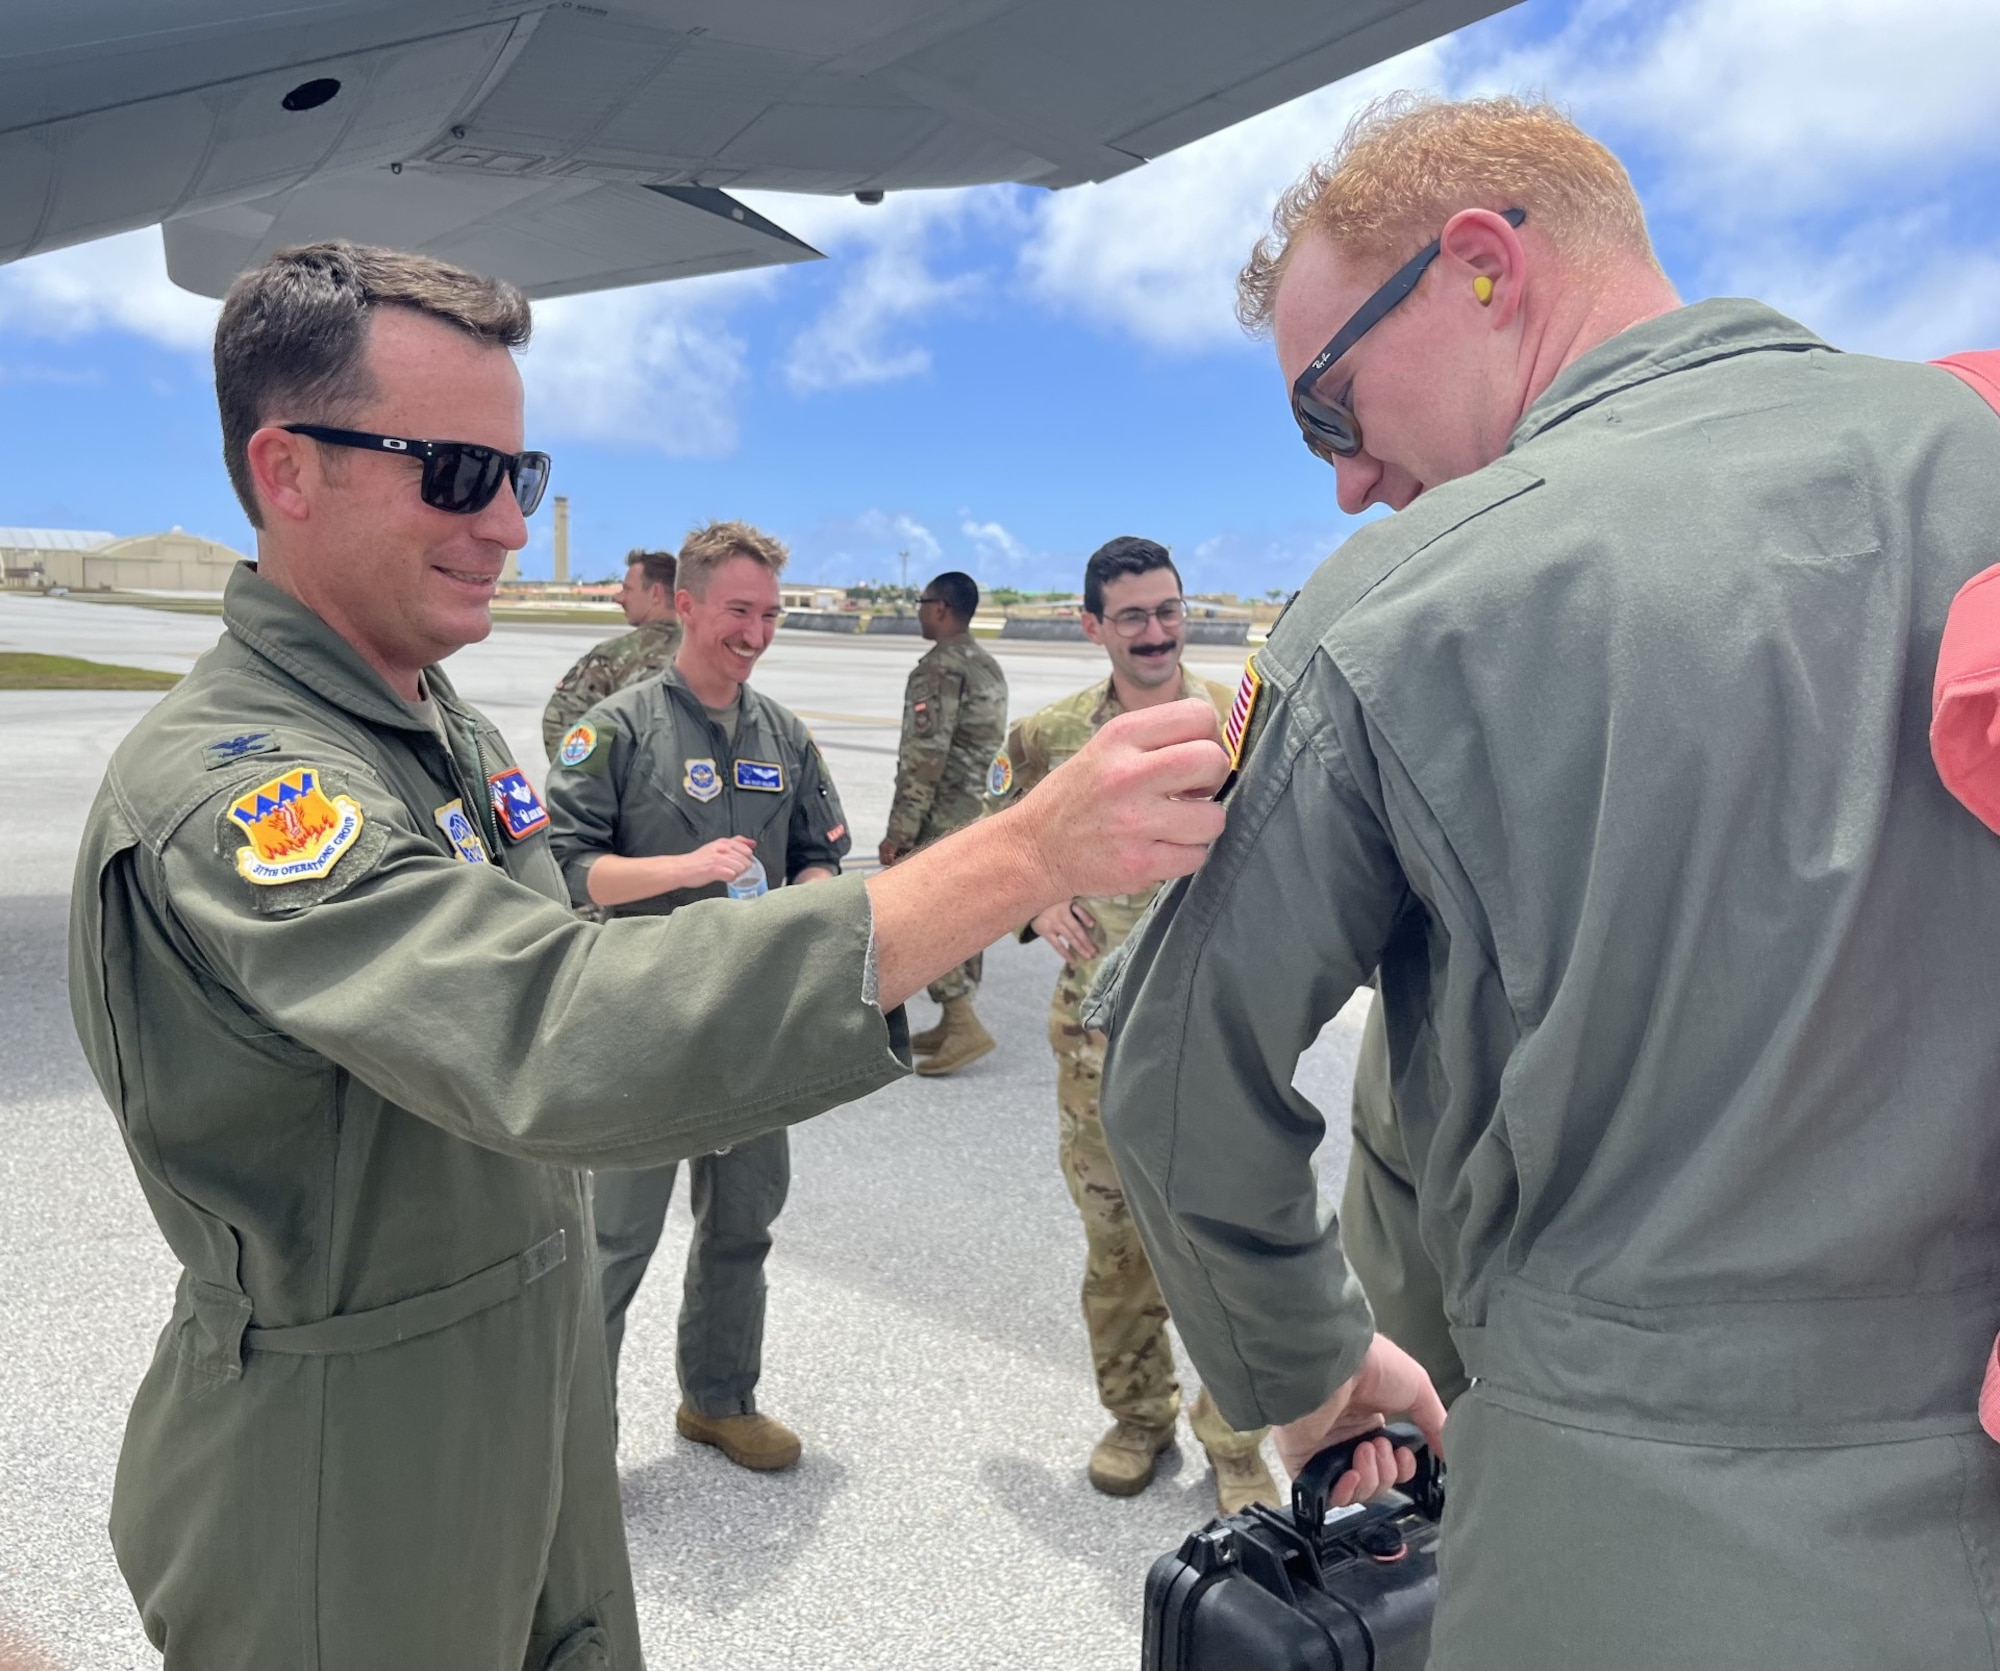 The 317th Operations Group Commander gives out Hazard Leap patches to the flight crew.